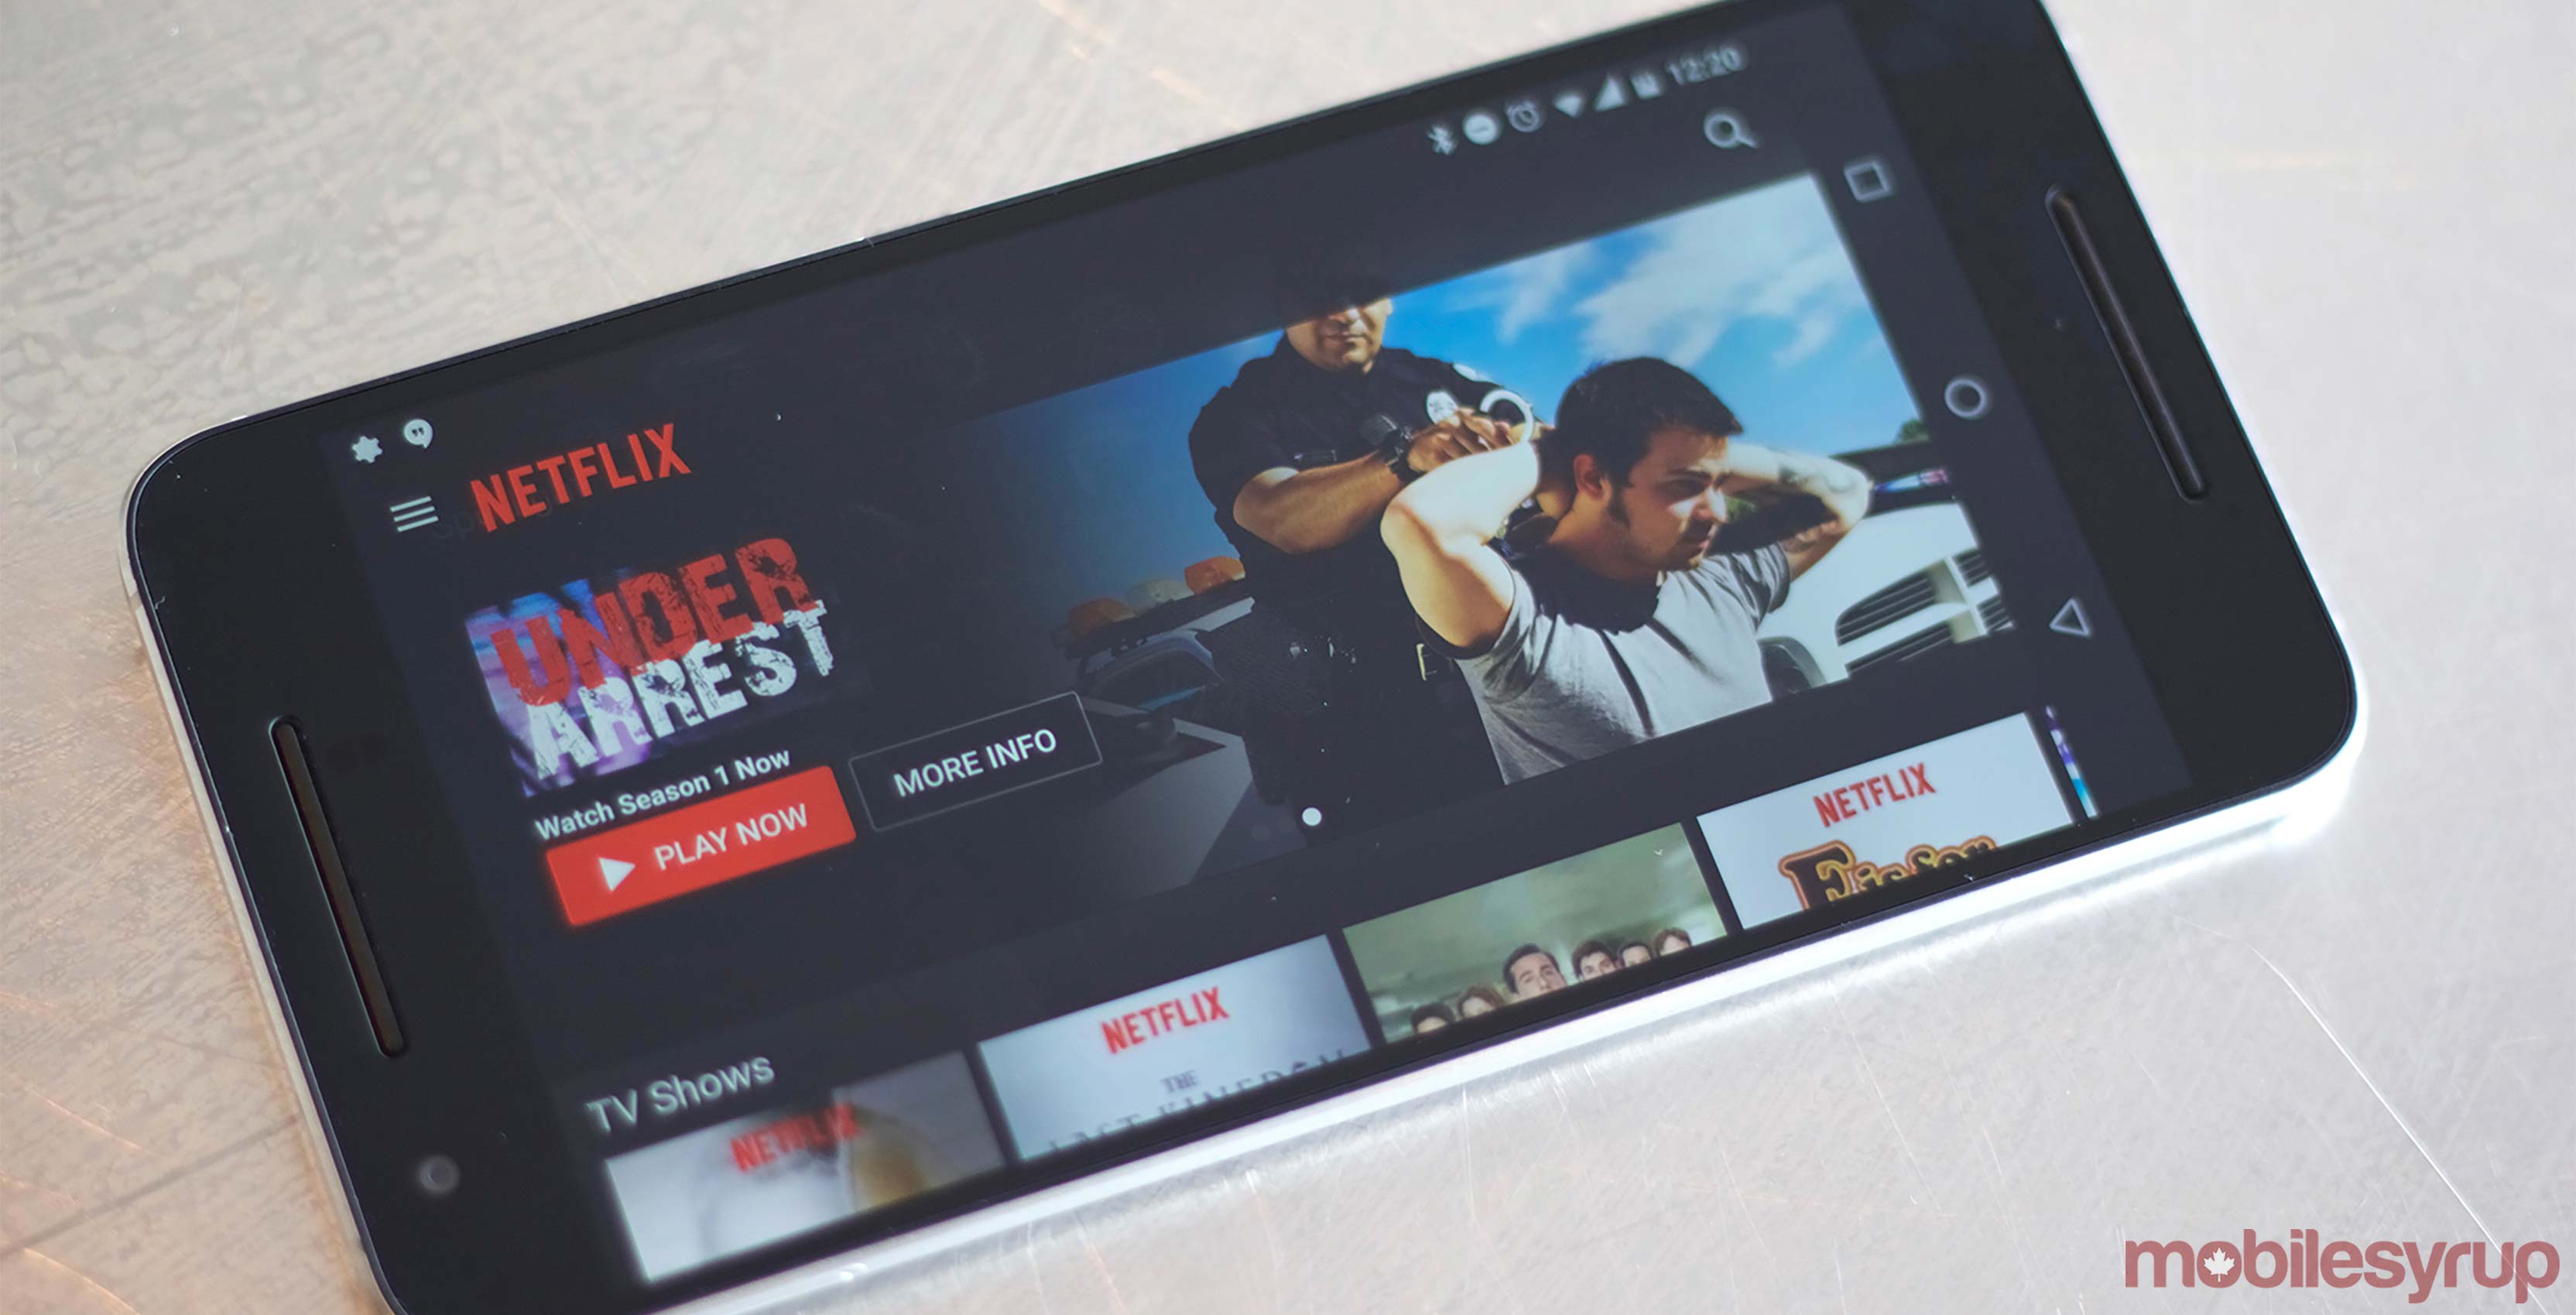 Netflix app on Android